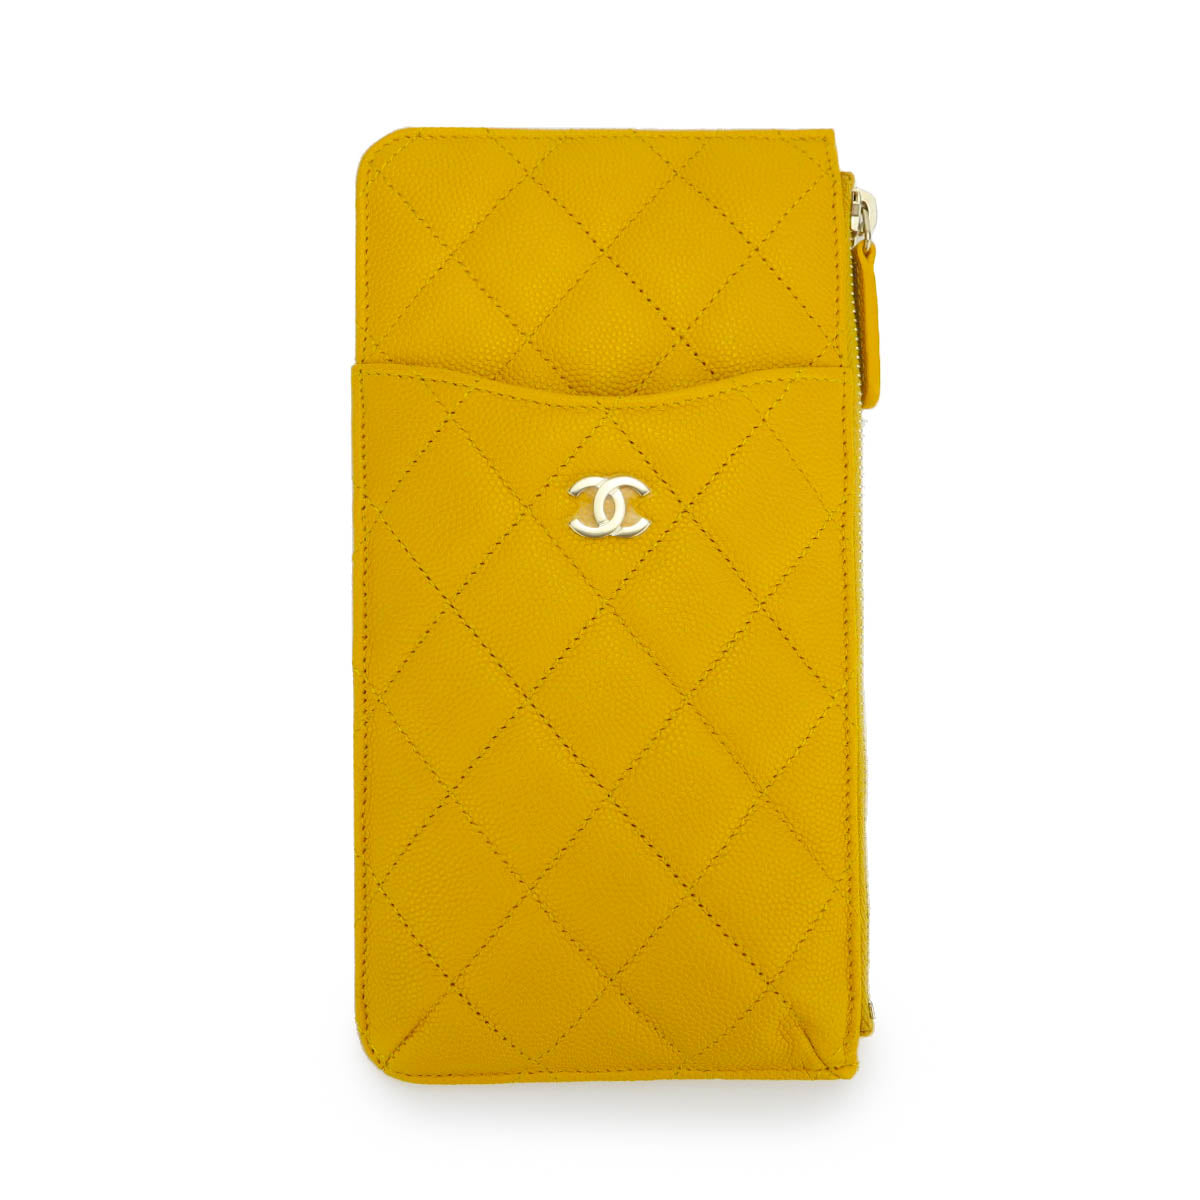 CHANEL Phone Pouch in Yellow Caviar